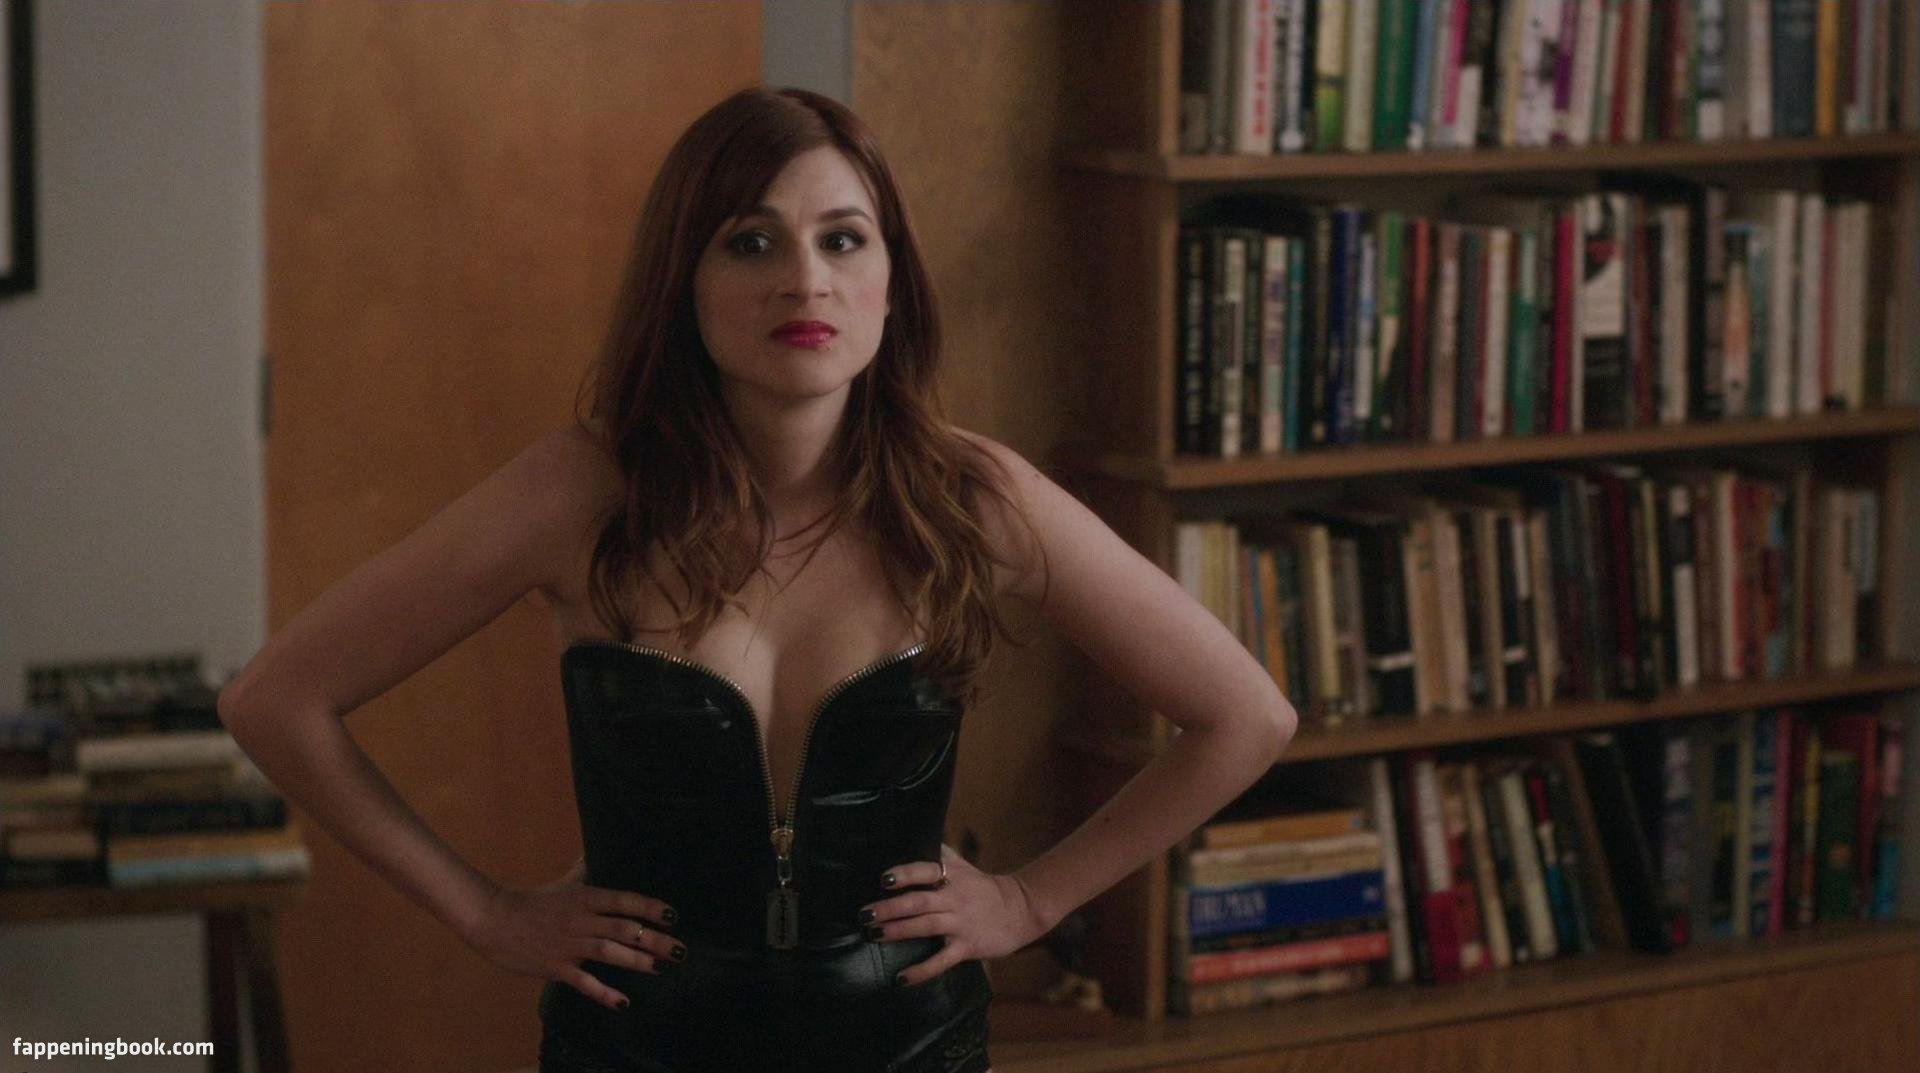 Aya Cash Nude, The Fappening - Photo #60413 - FappeningBook.